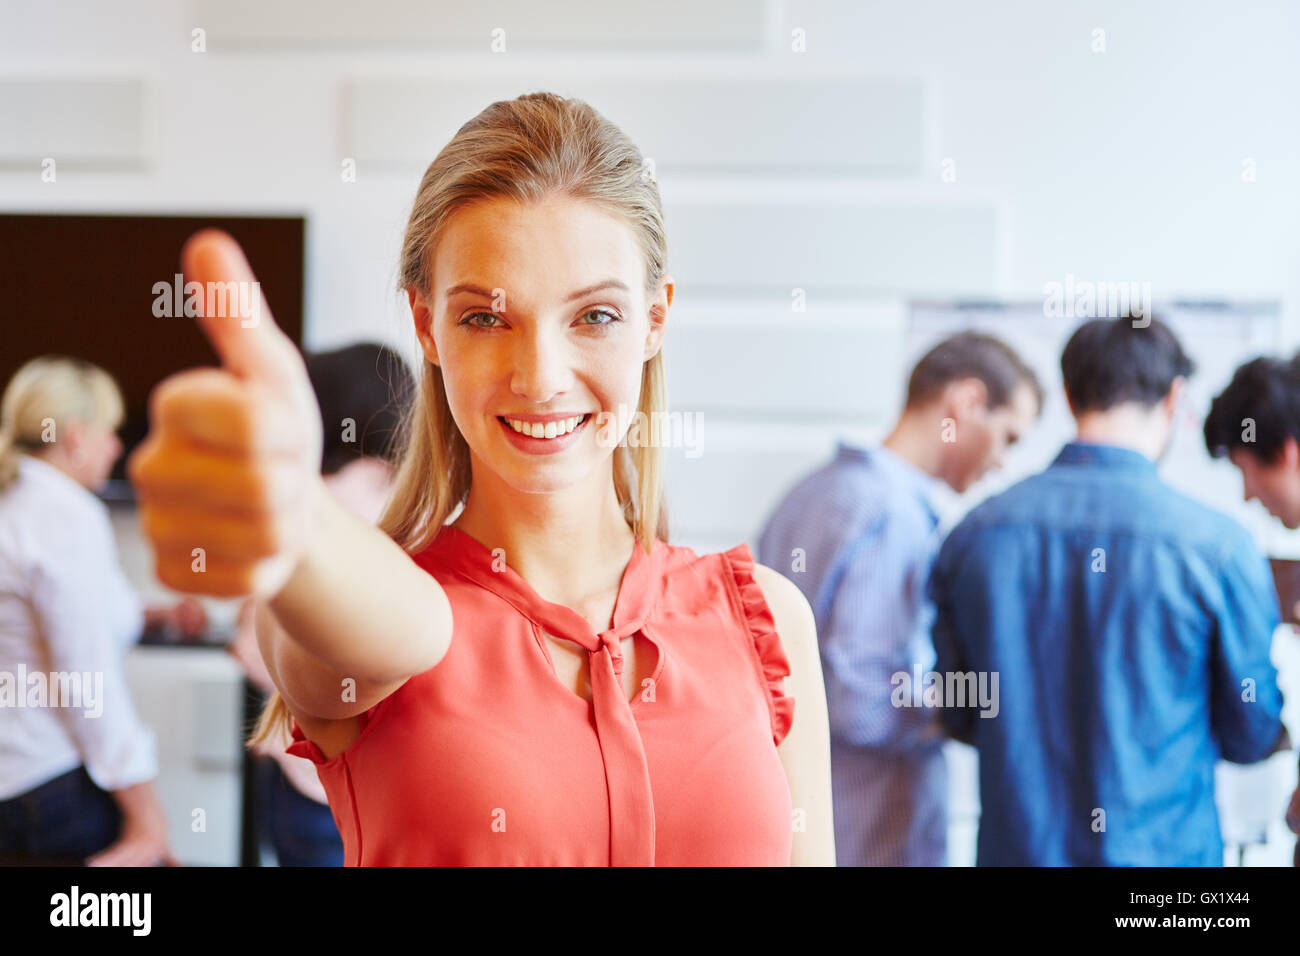 Businesswoman in start-up company holding thumbs up as a sign of success Stock Photo